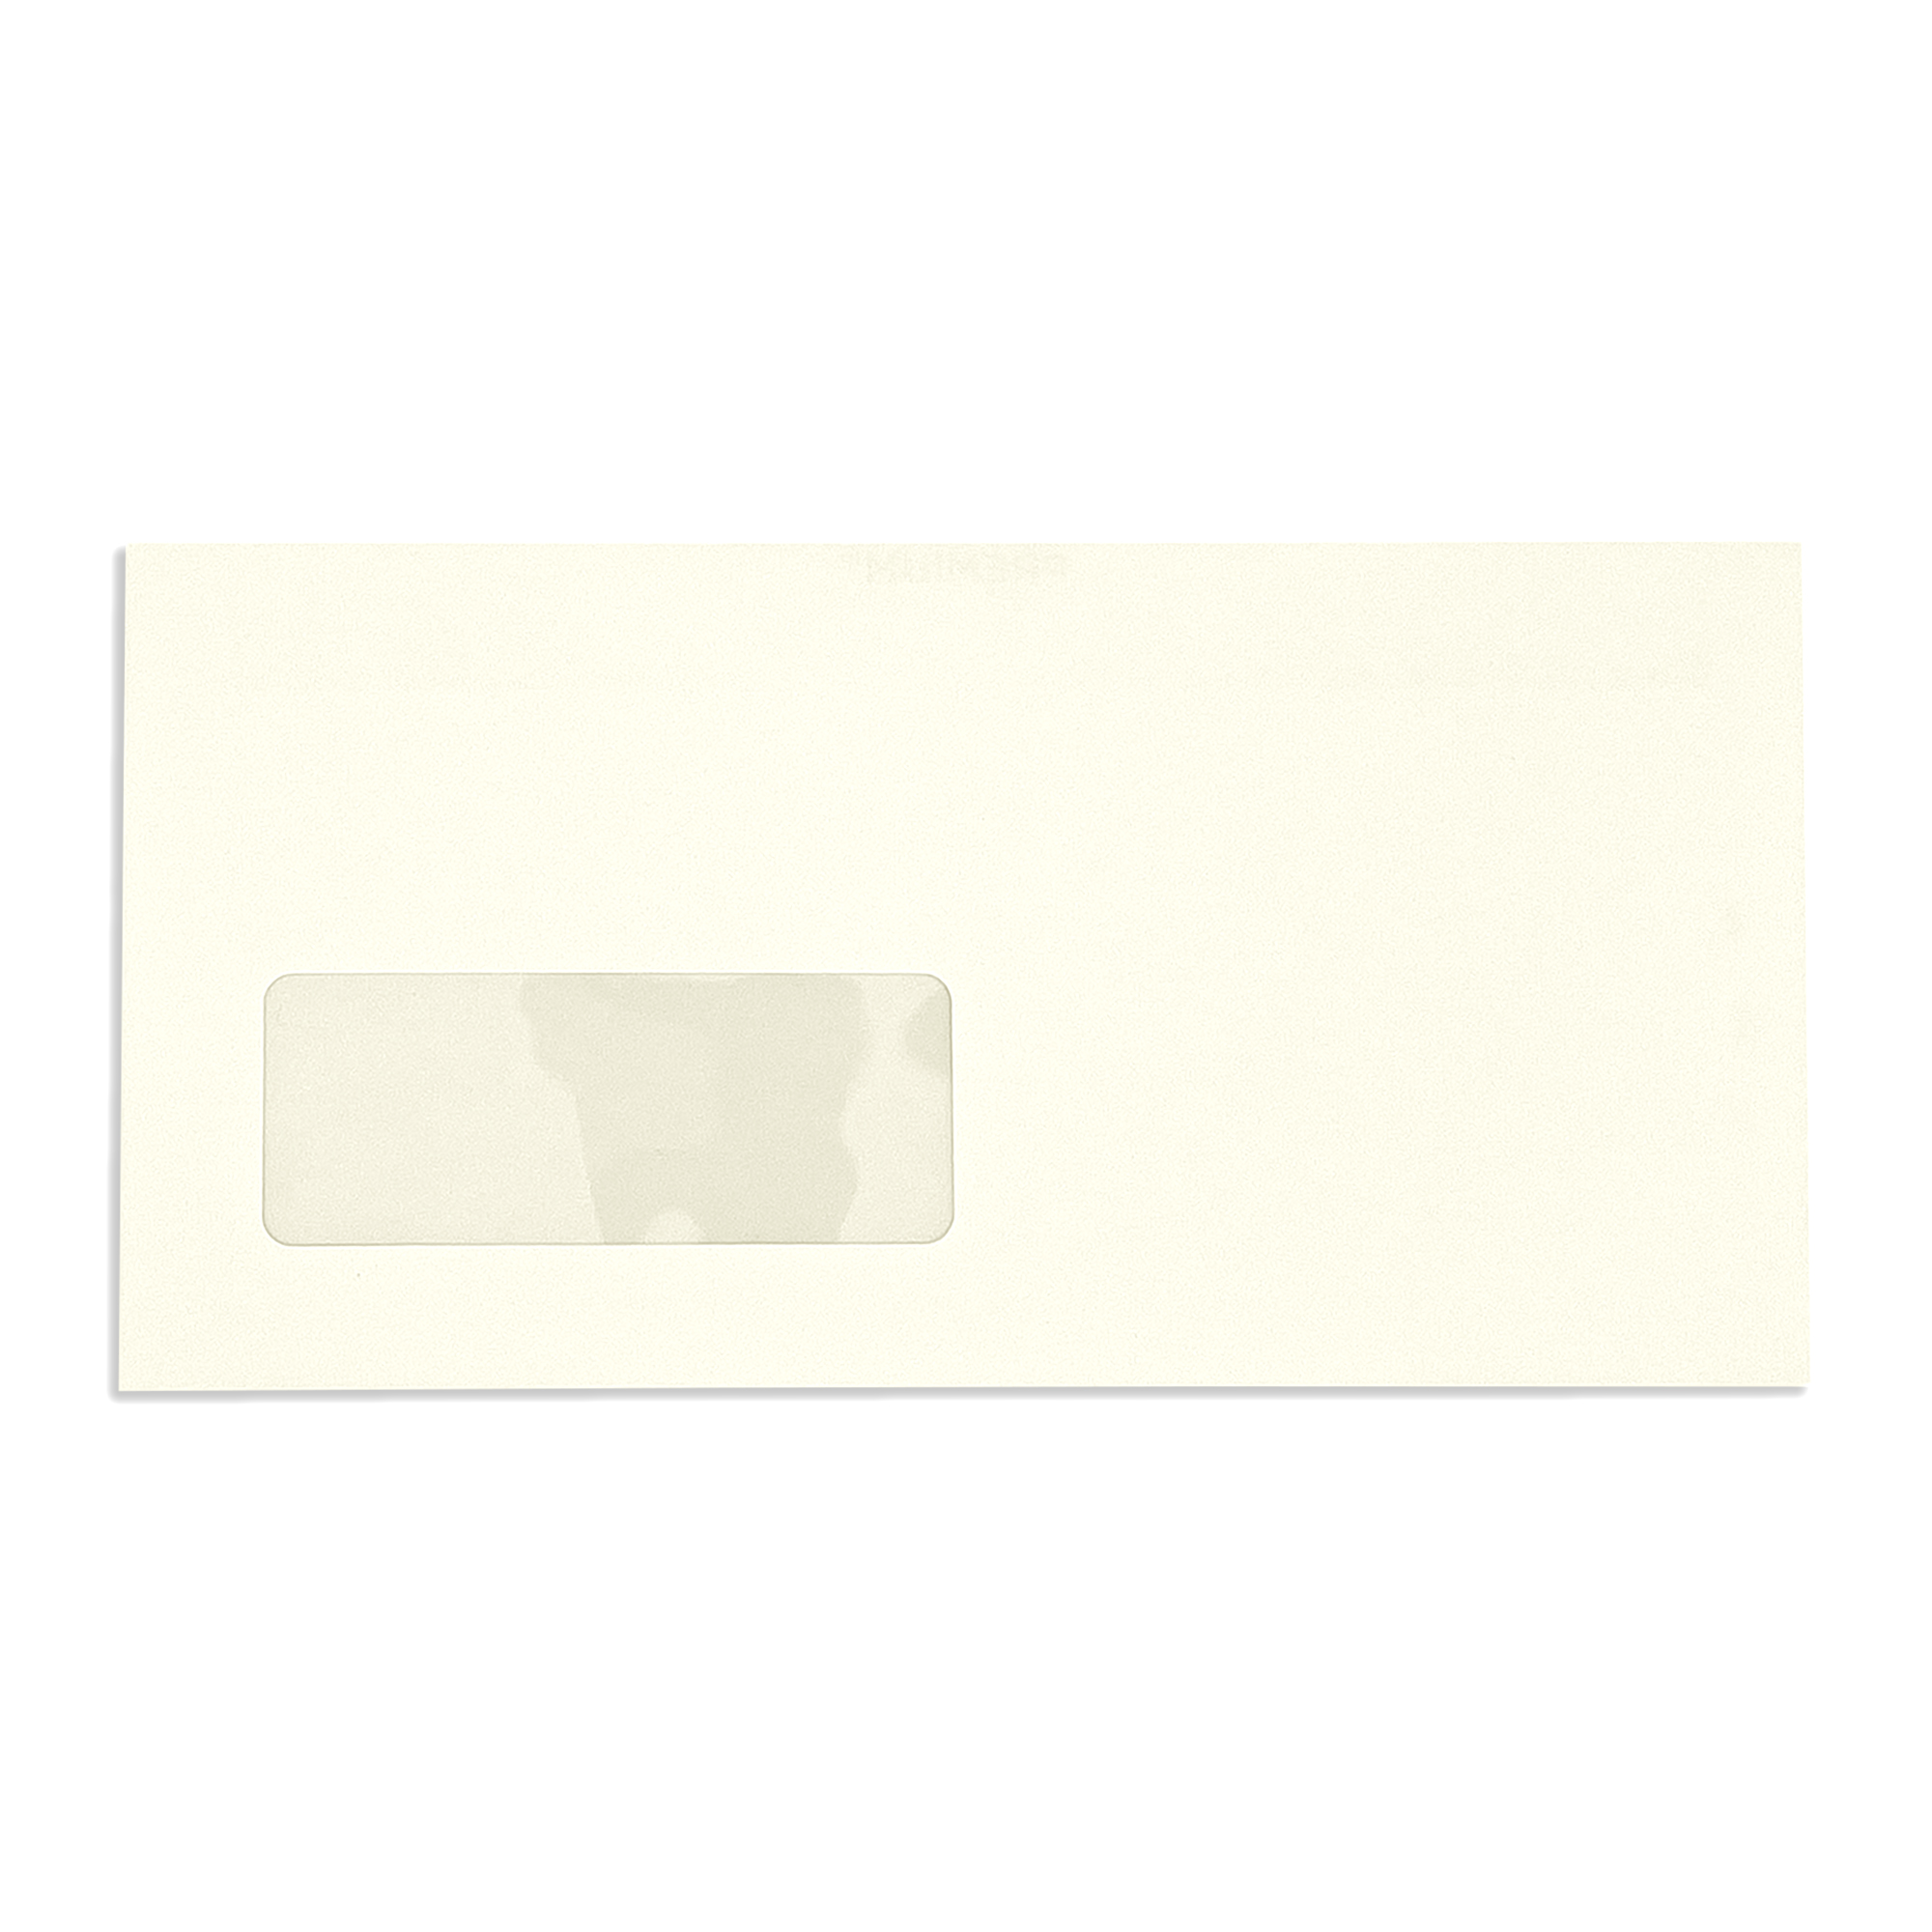 DL-window-oyster-wove-120gsm-envelopes-face